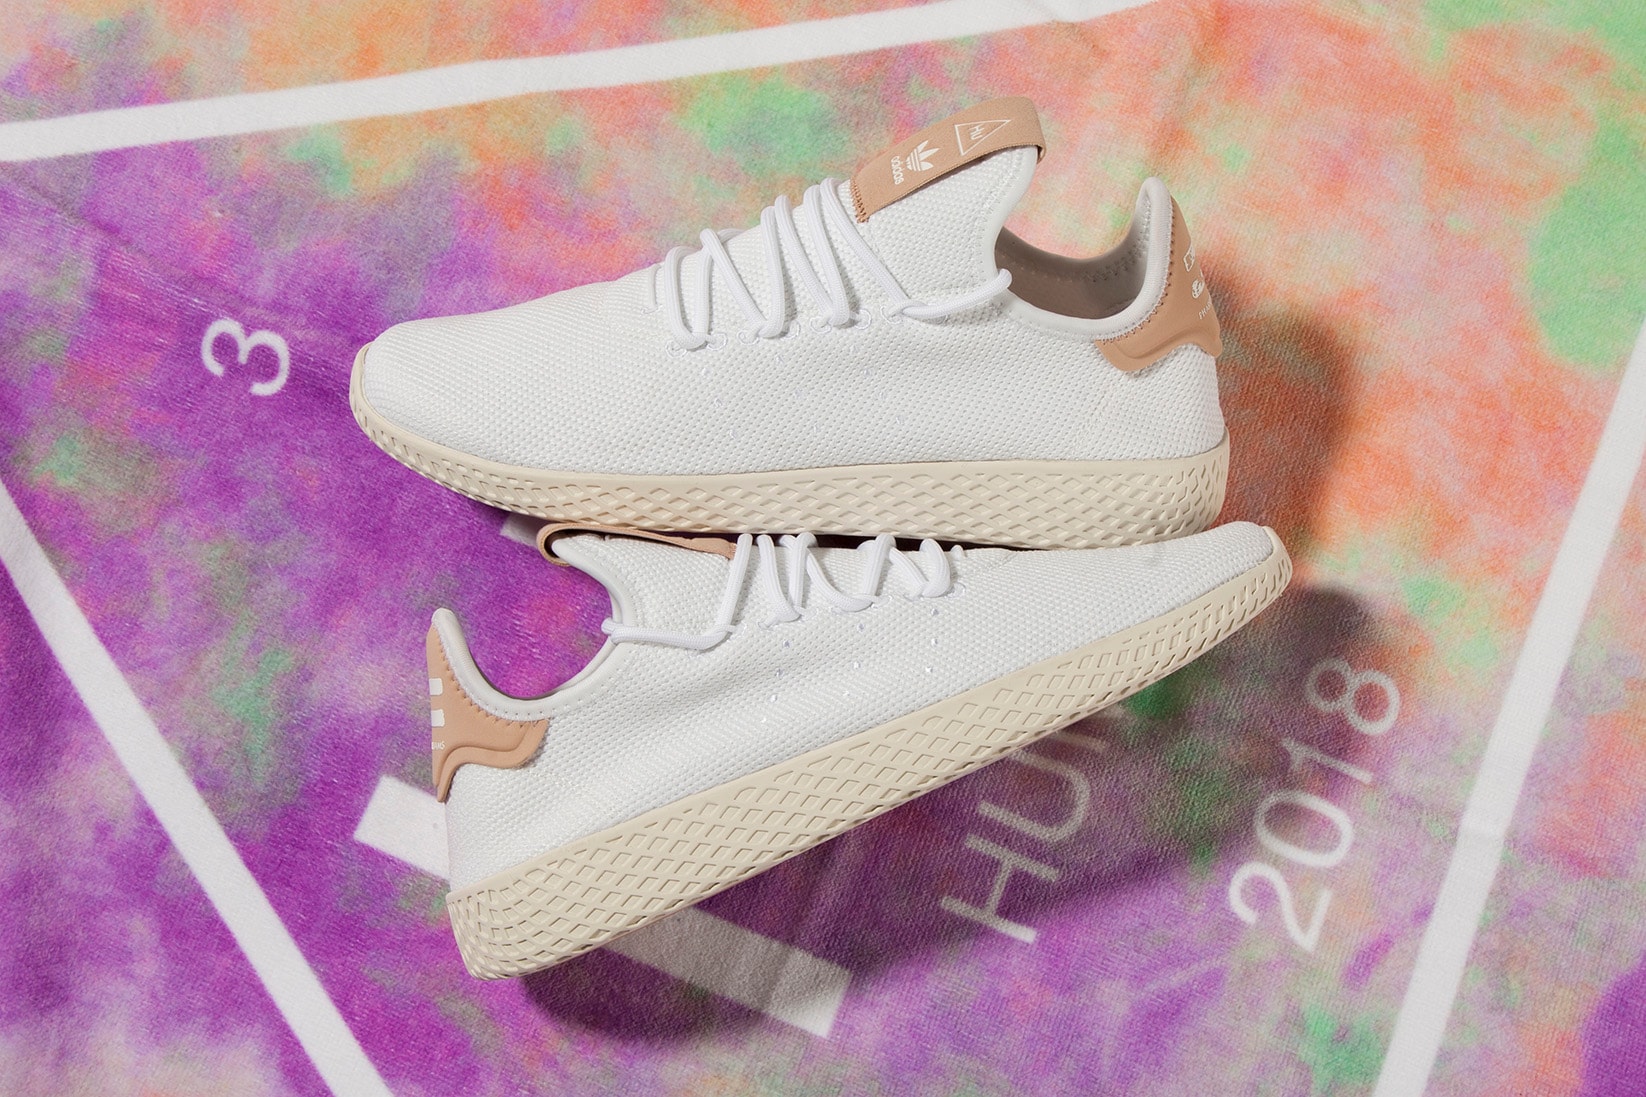 adidas Originals Pharrell Williams Tennis Hu New Colorway White Chalk Available Deadstock Release Information Details How to Buy Cop Purchase